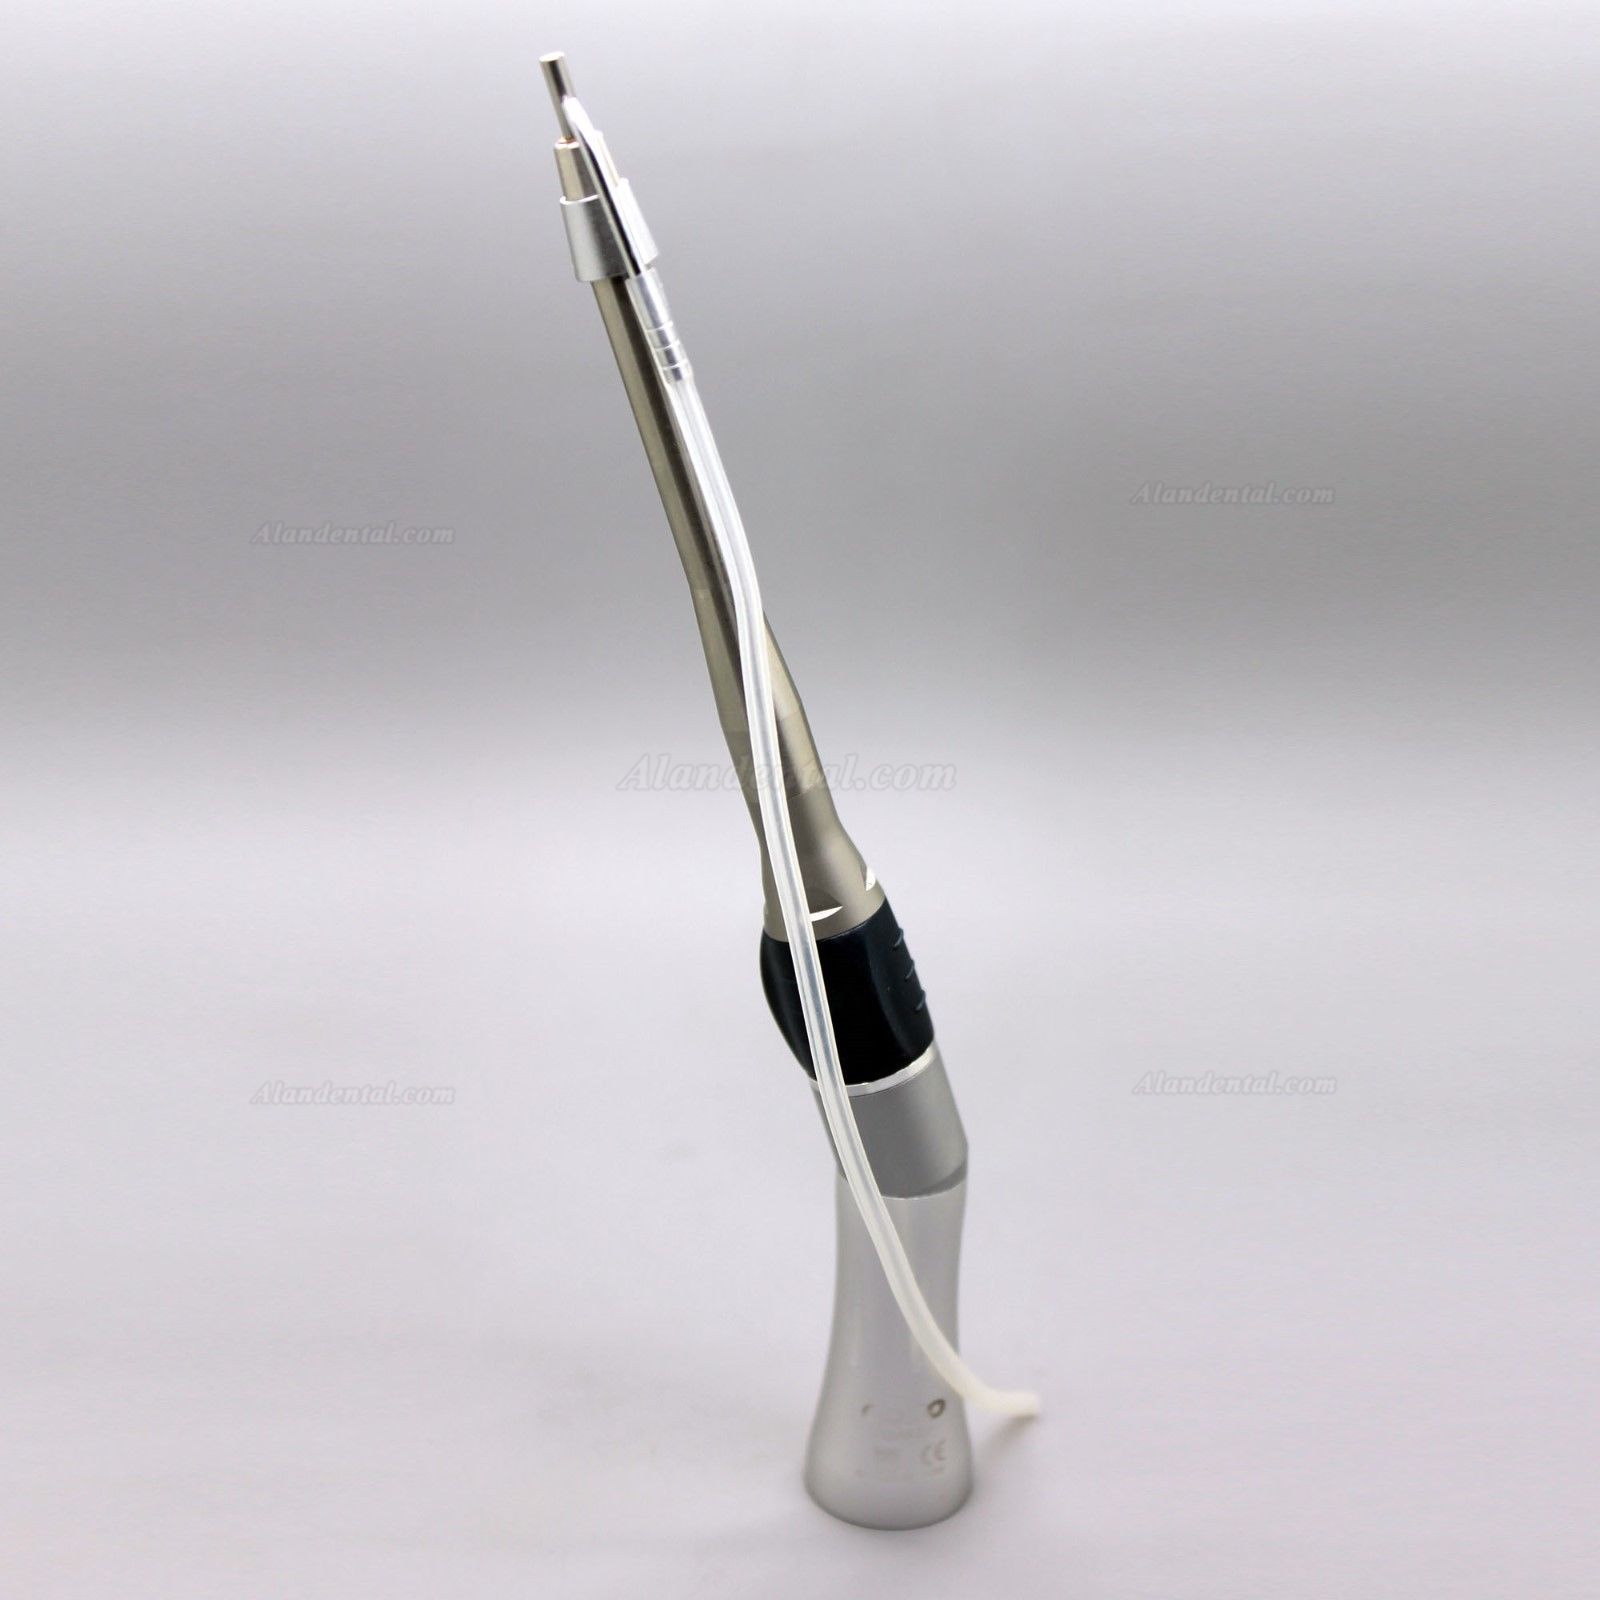 YUSENDENT® CX235-2S1 1:1 Dental Surgical Operation Straight Handpiece 20°Angle